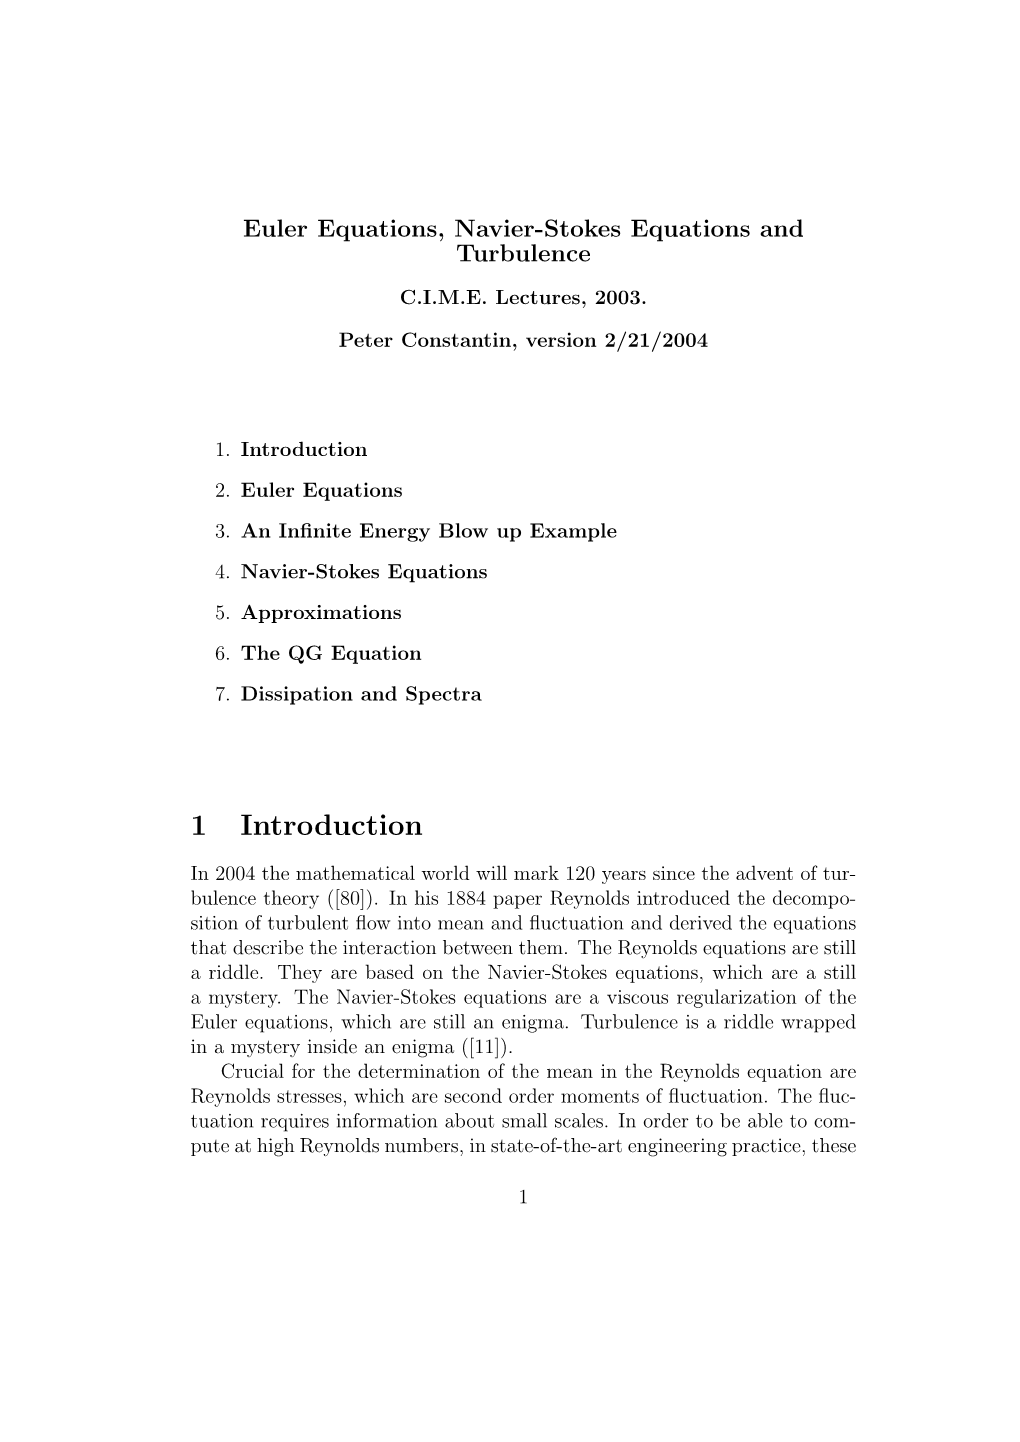 Euler Equations, Navier-Stokes Equations and Turbulence